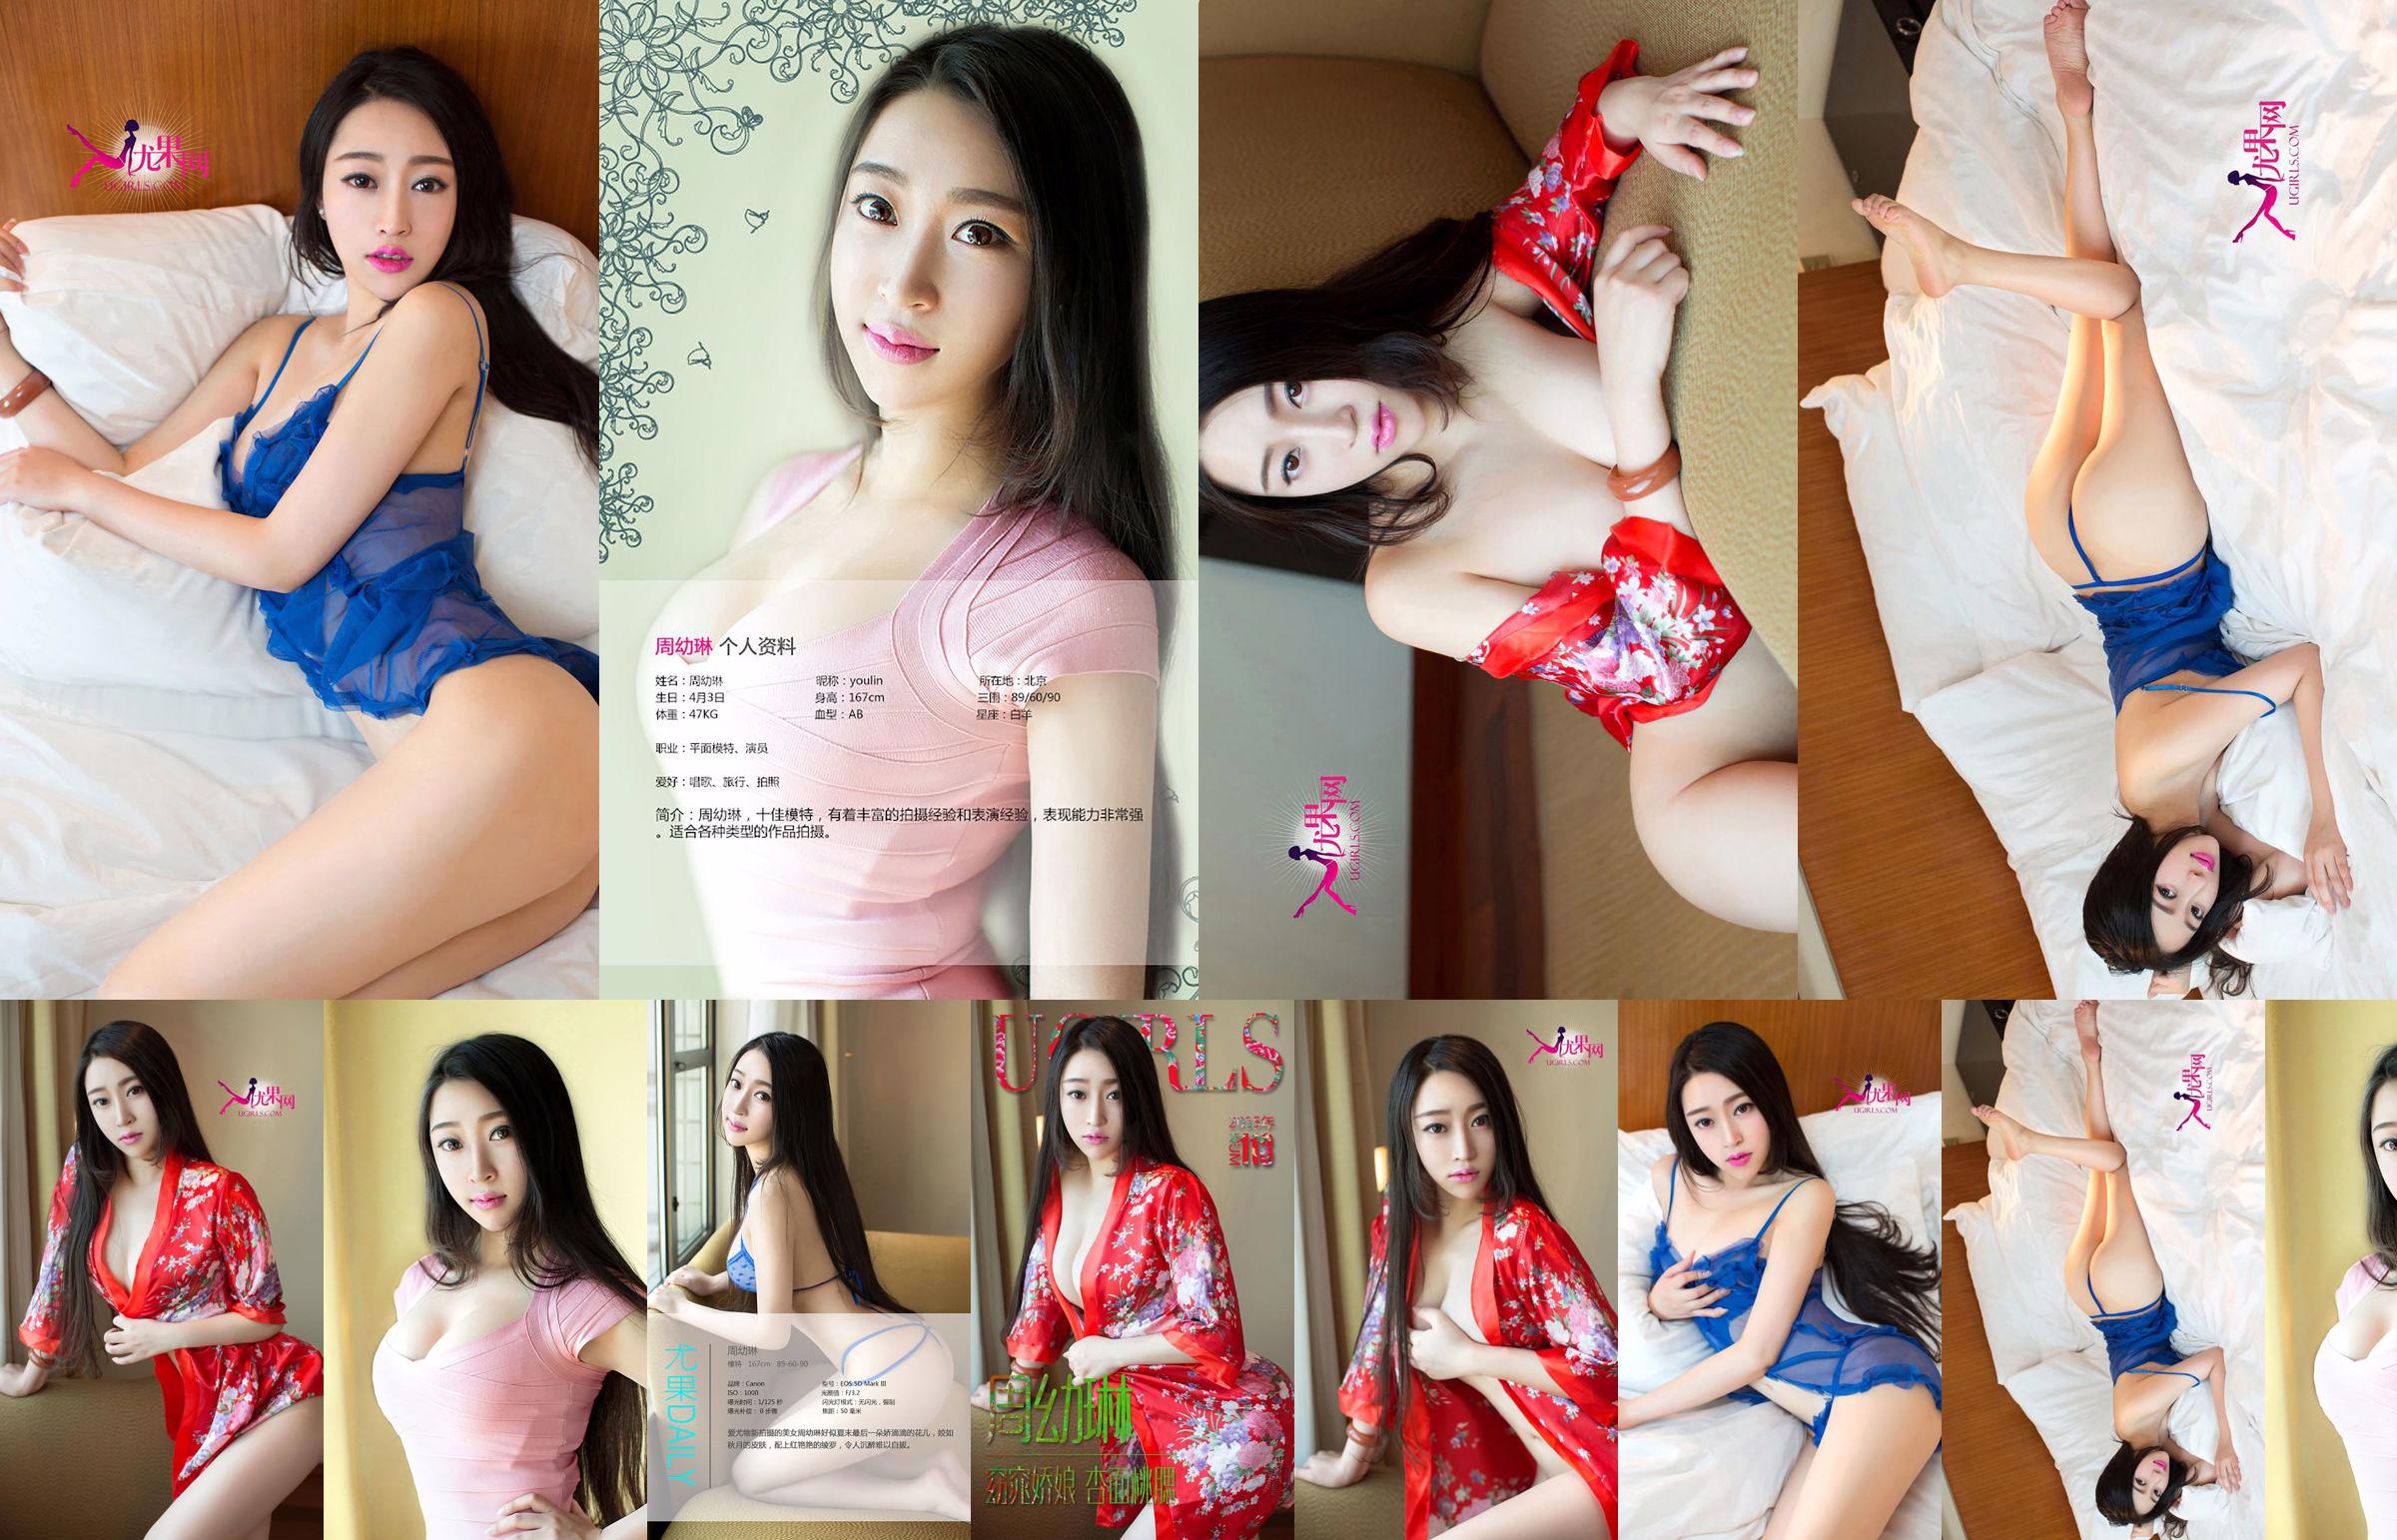 Zhou Youlin "A Beautiful Girl with Apricot Face and Peach Cheeks" [Love Youwu Ugirls] No.113 No.449bd3 หน้า 1